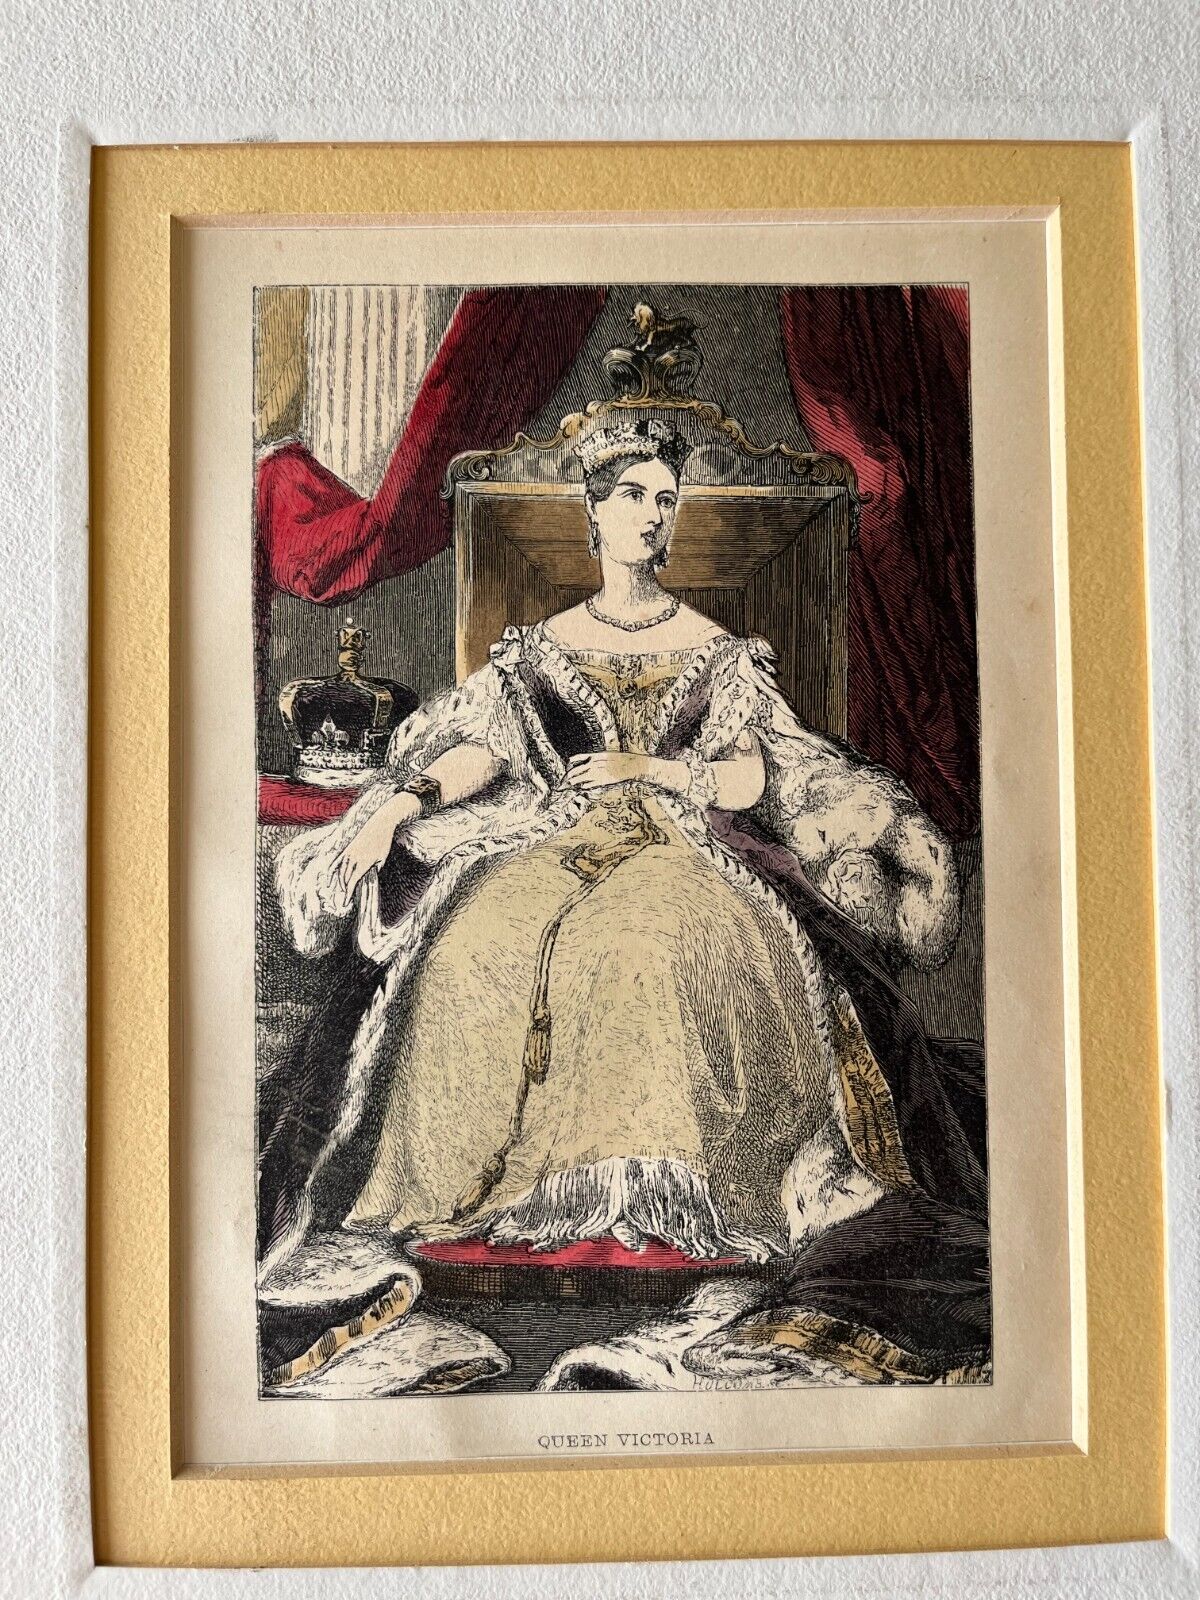 Antique Early Queen Victoria Engraving Etching print - Hand color